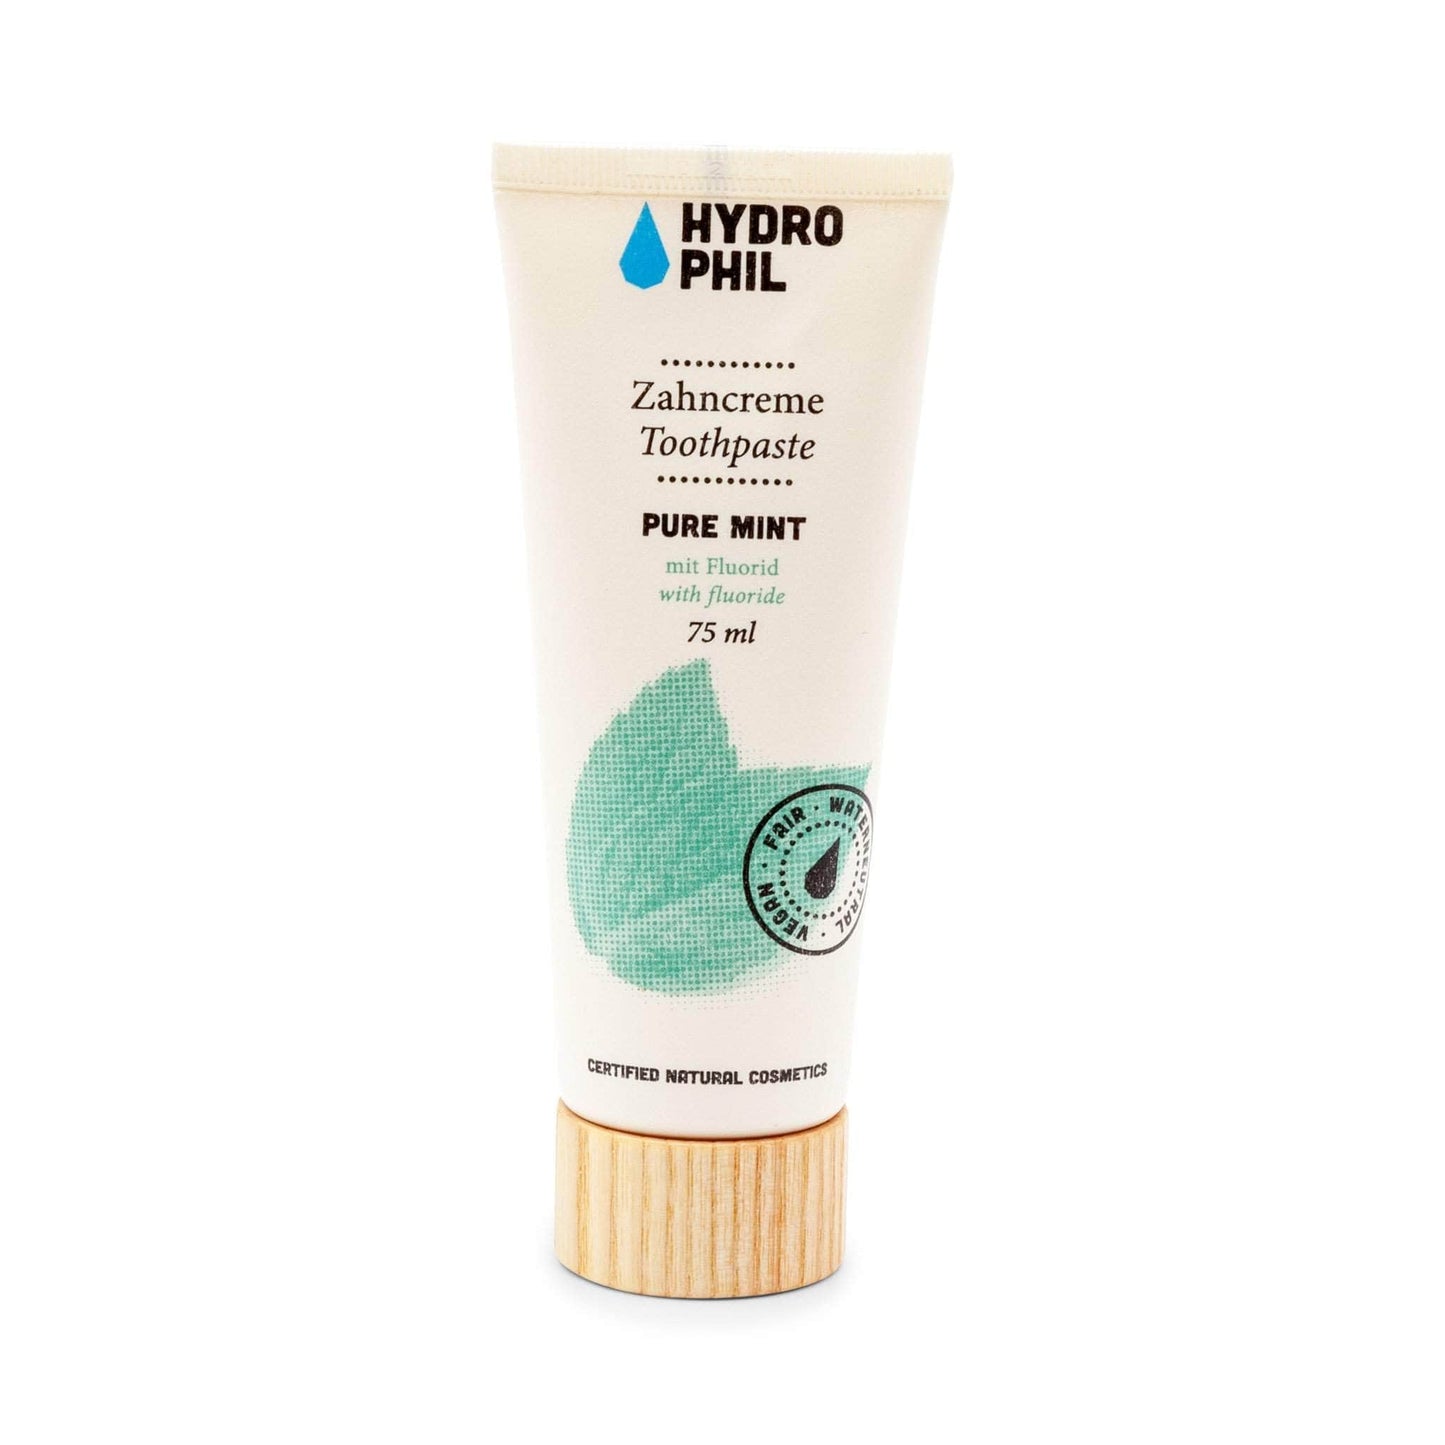 Hydrophil Toothpaste Hydrophil - Toothpaste Pure Mint With Fluoride